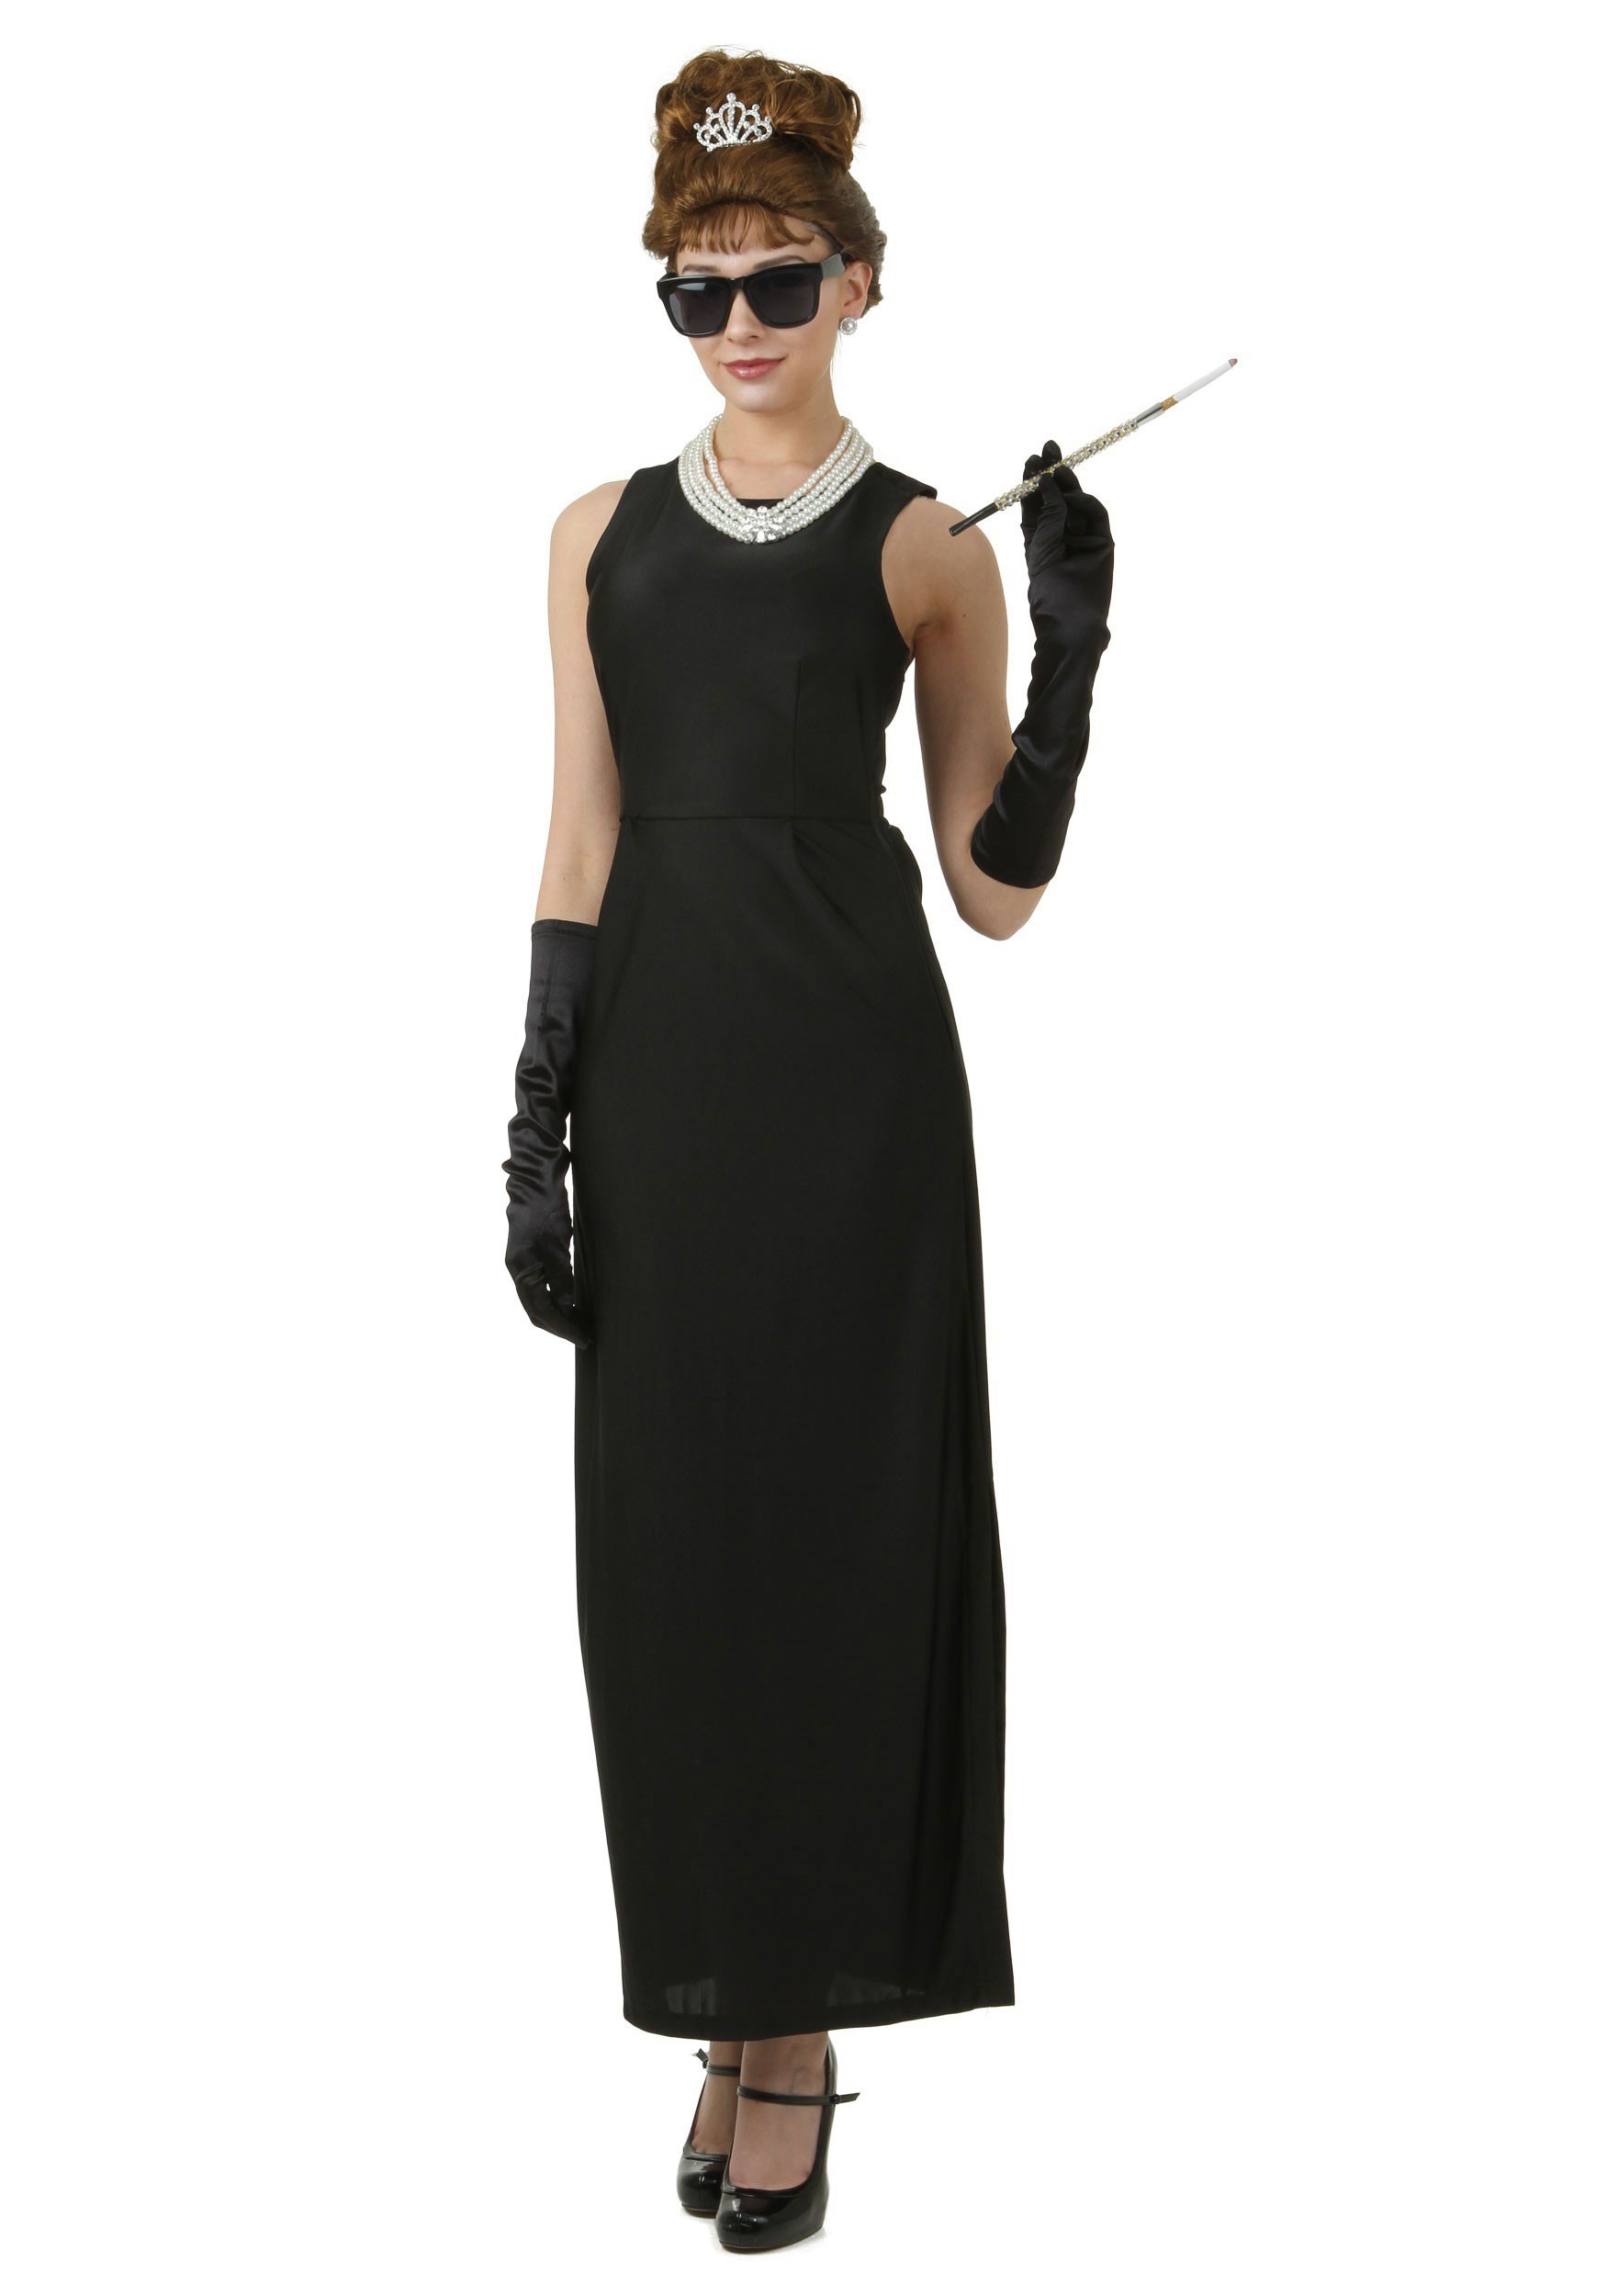 Breakfast at Tiffany's Holly Golightly Costume for Women